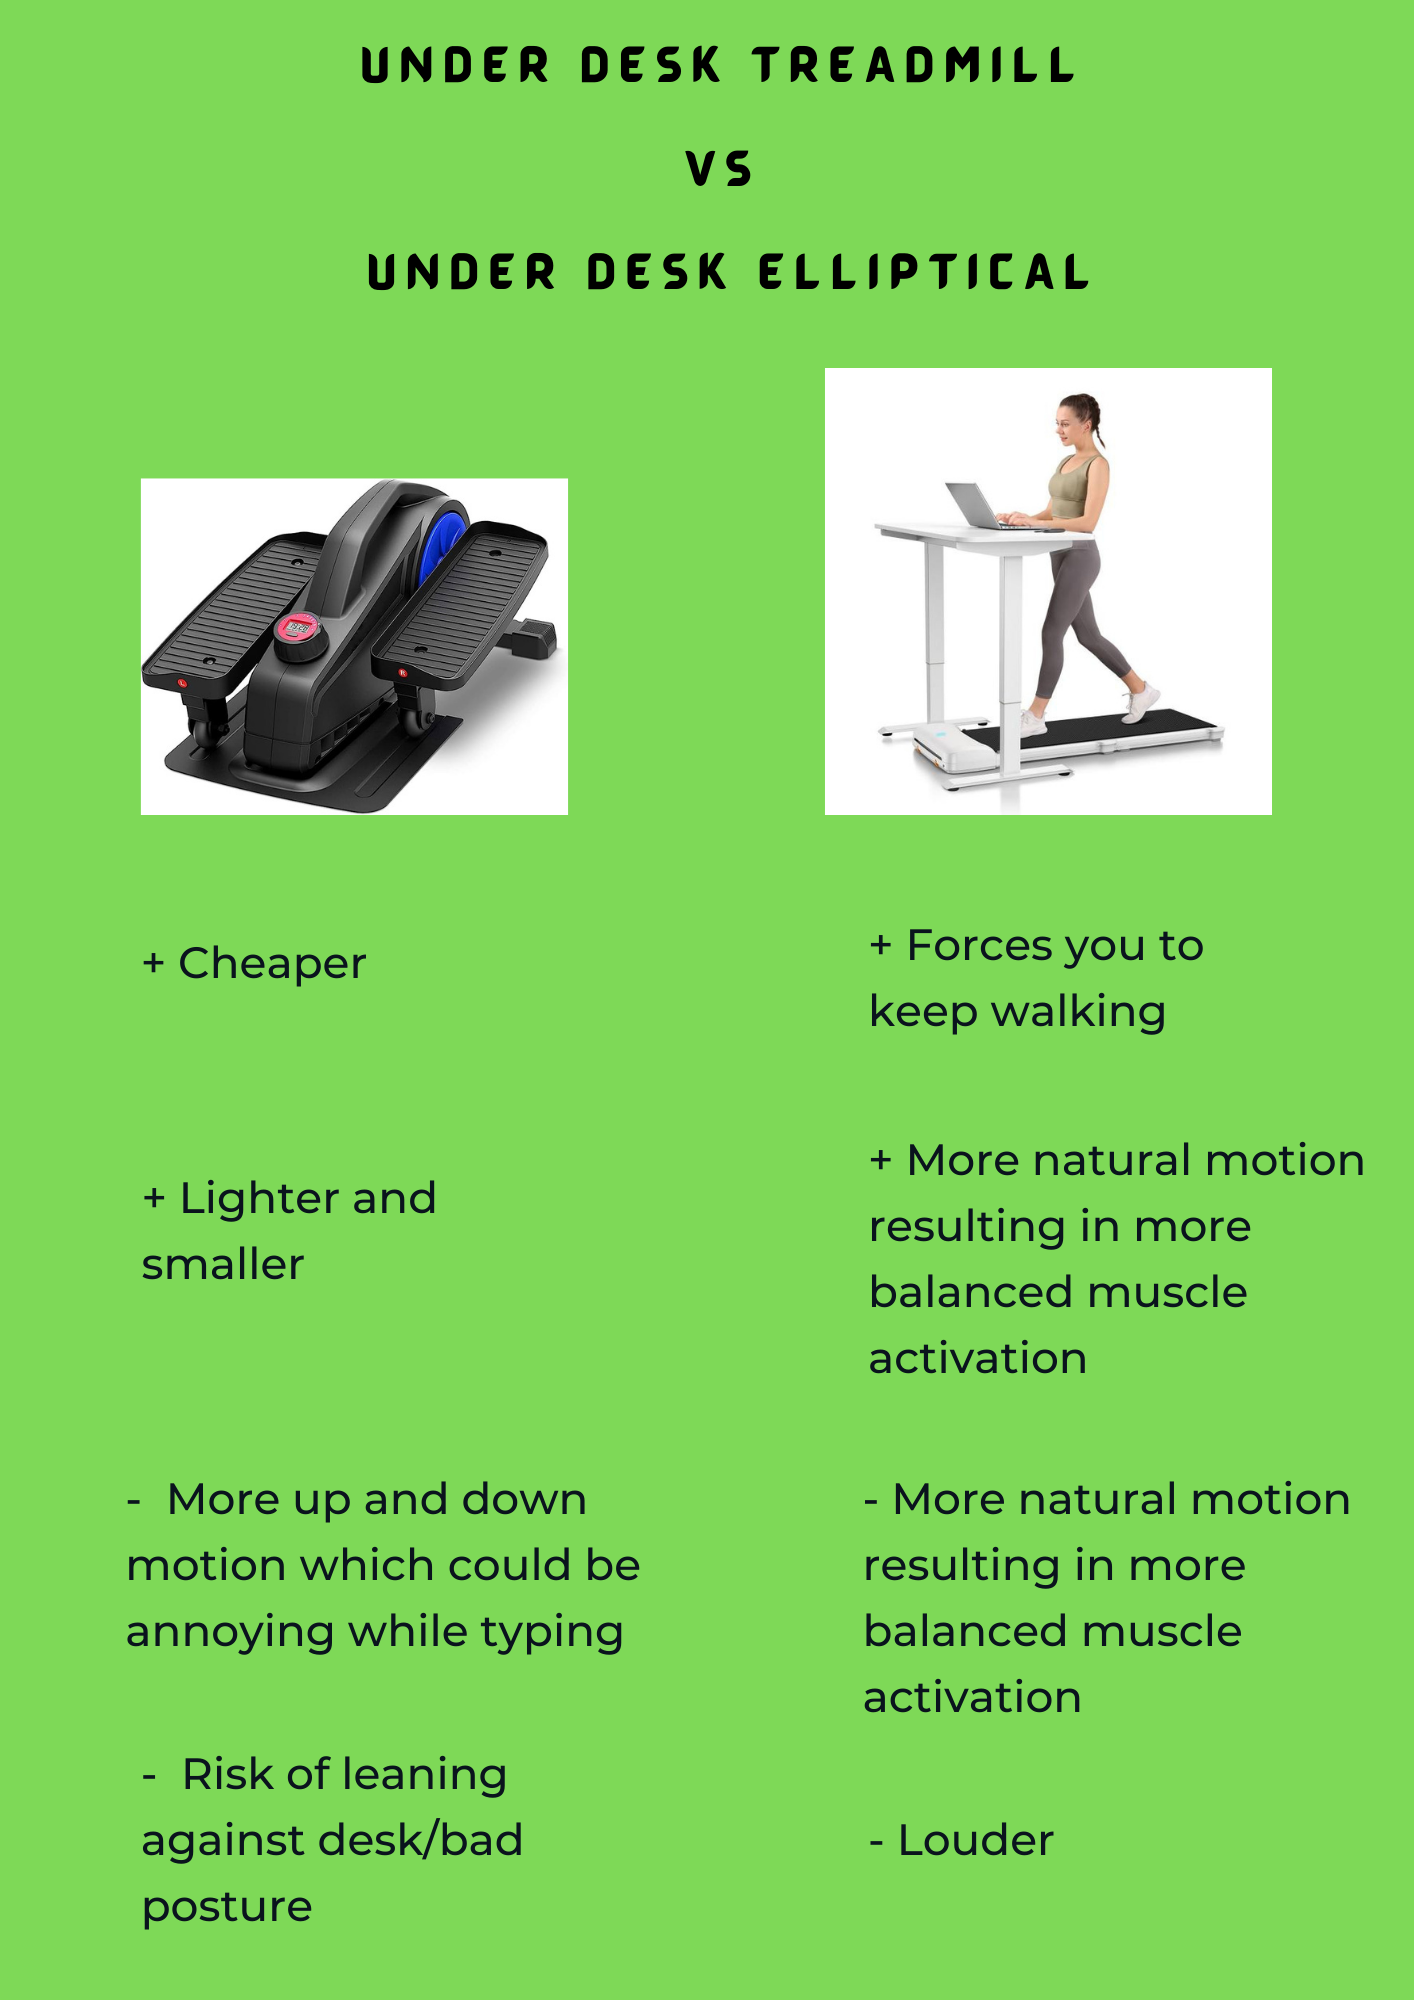 Under Desk Elliptical vs Treadmill: Which One is Better for You?